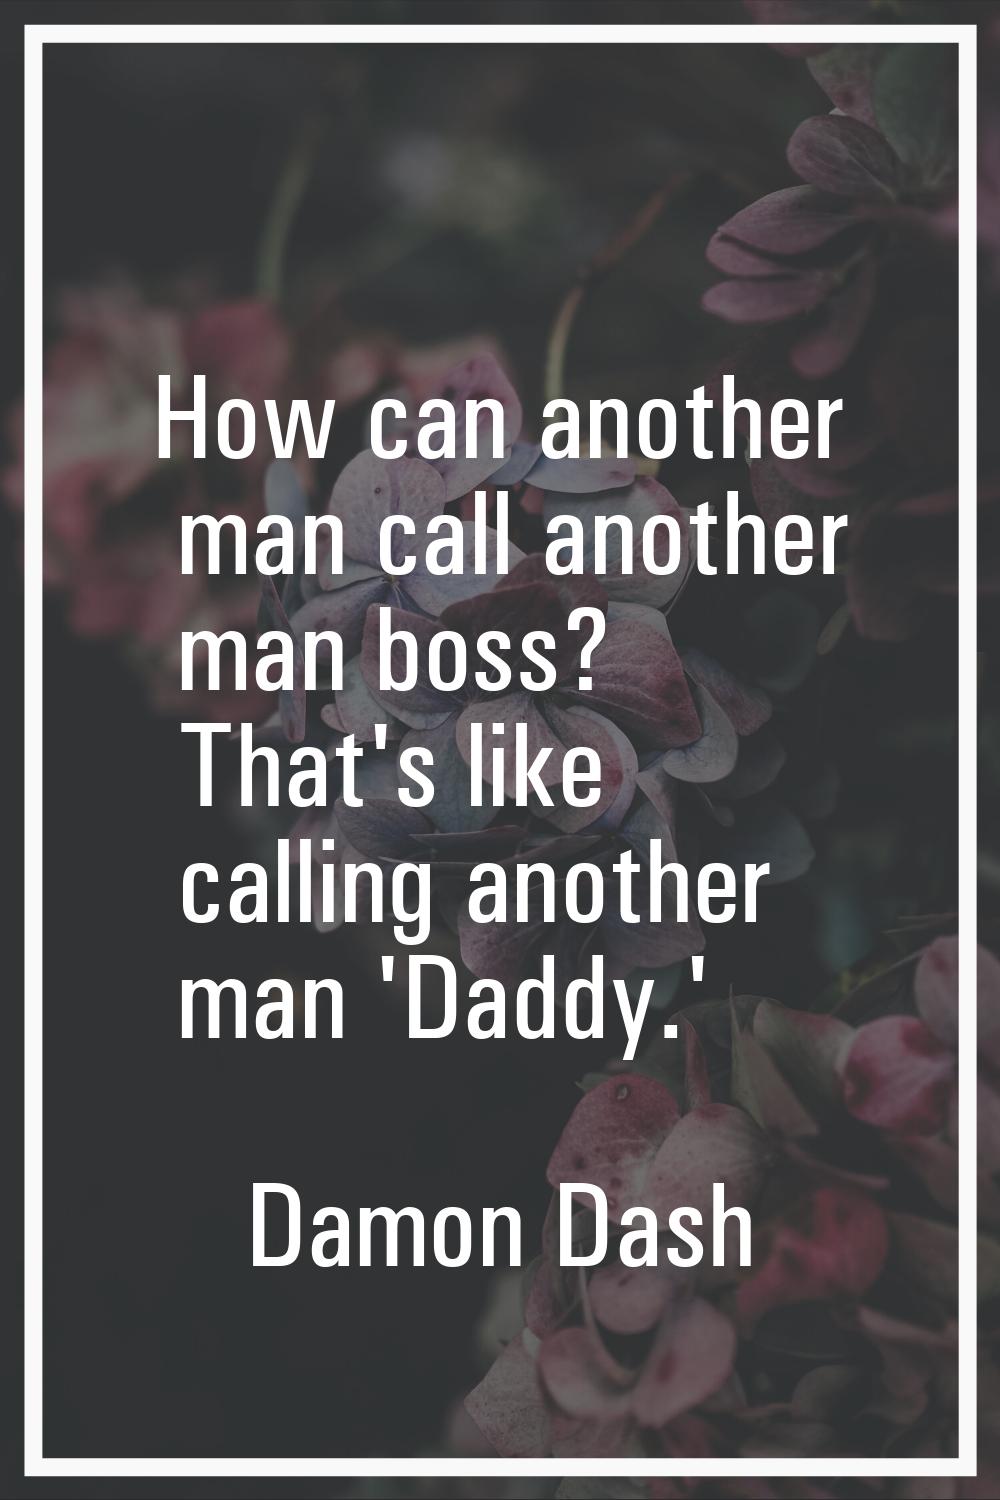 How can another man call another man boss? That's like calling another man 'Daddy.'